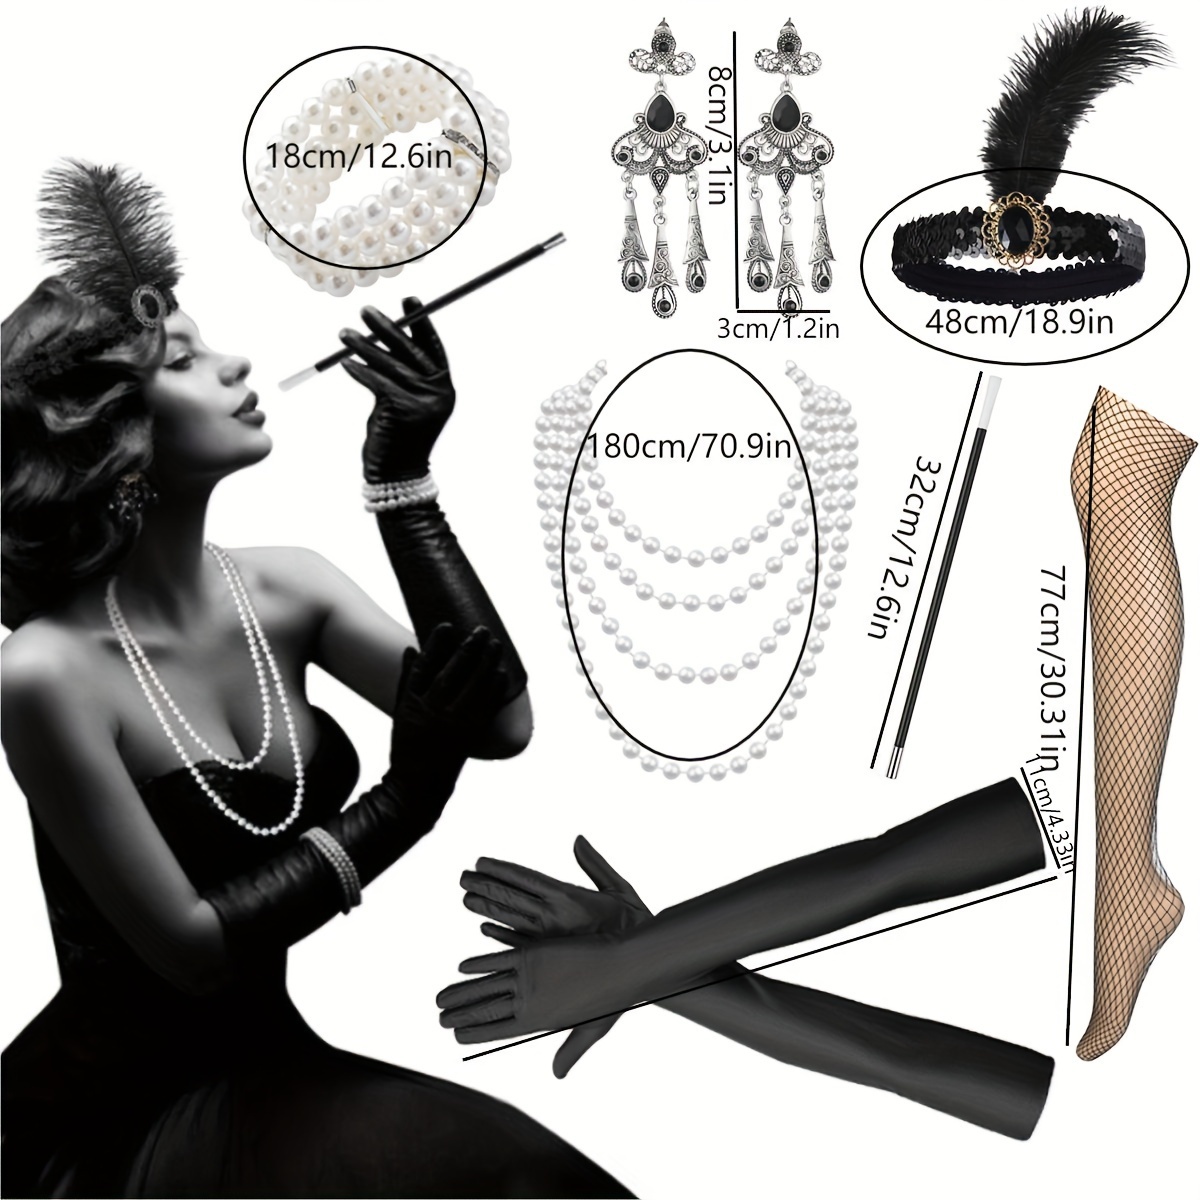 1920s Style Vintage Accessory Set Great Gatsby Themed Accessories Halloween  Carnival Party Cosplay Dress Up Accessories